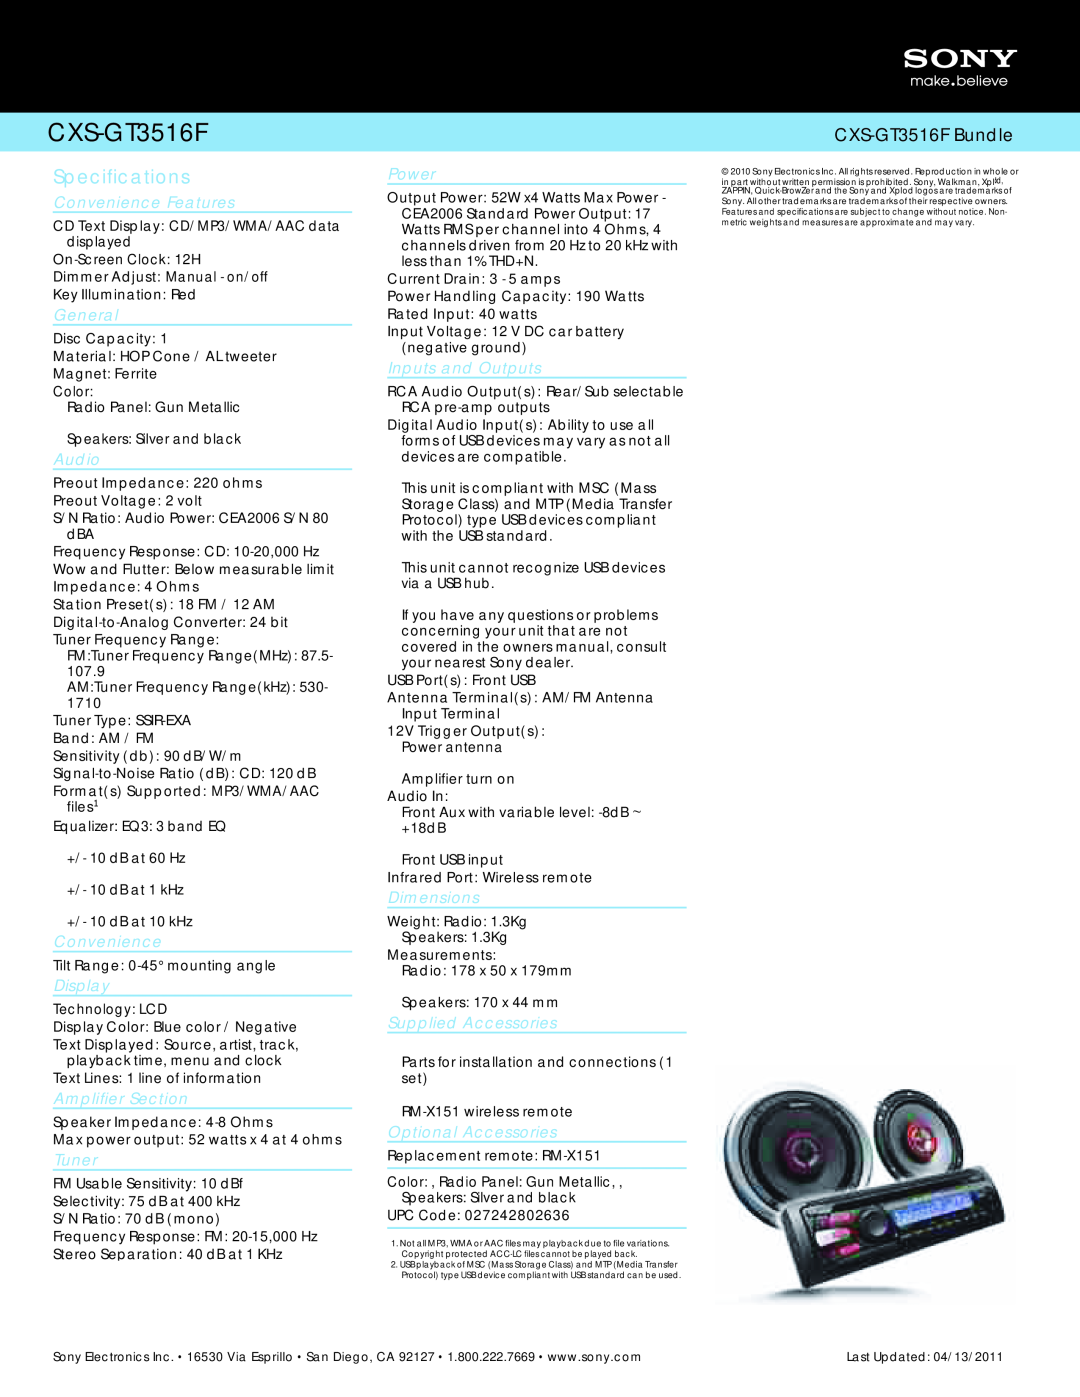 Sony manual Specifications, CXS-GT3516F Bundle 